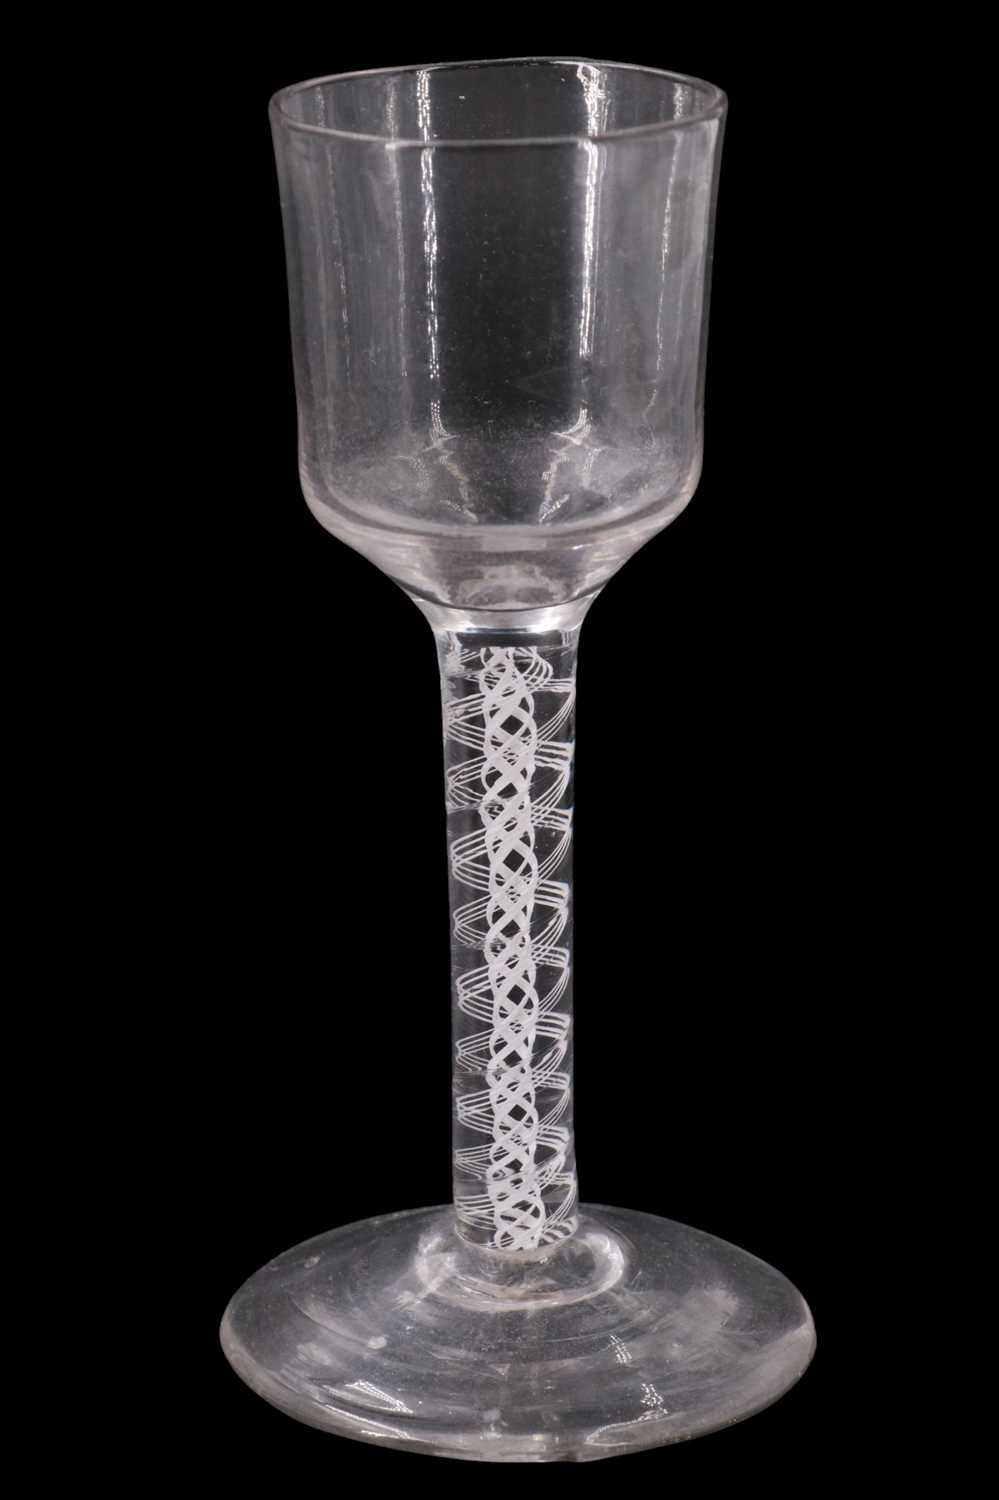 A mid 18th Century opaque twist stemmed wine glass, having a near square bucket bowl and compound